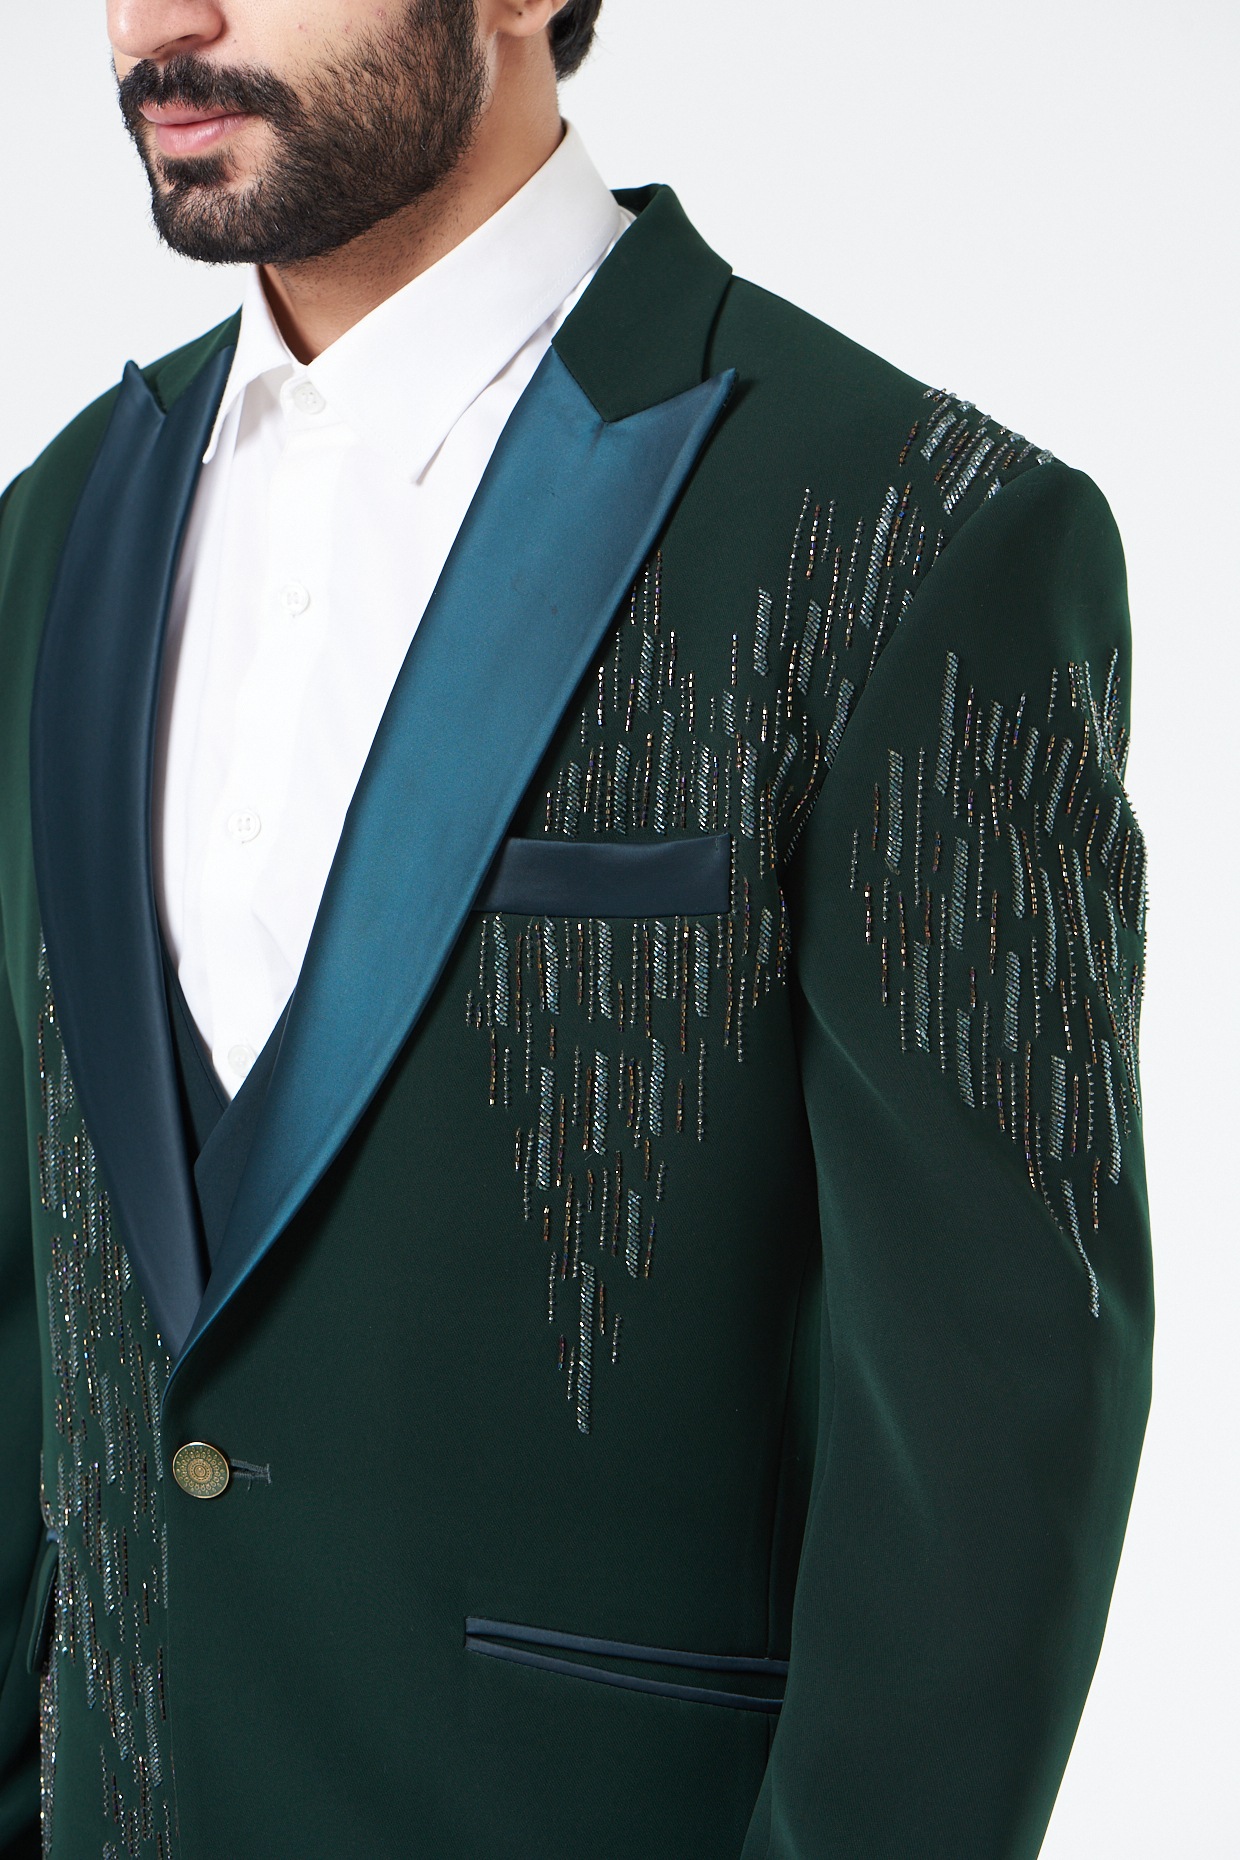 Vastraas New Stylish Partywear Formal Suits for Men in Bottle Green Color  Perfect of Every Event and Occasions. - Etsy | Green suit men, Formal suits  men, Mens outfits